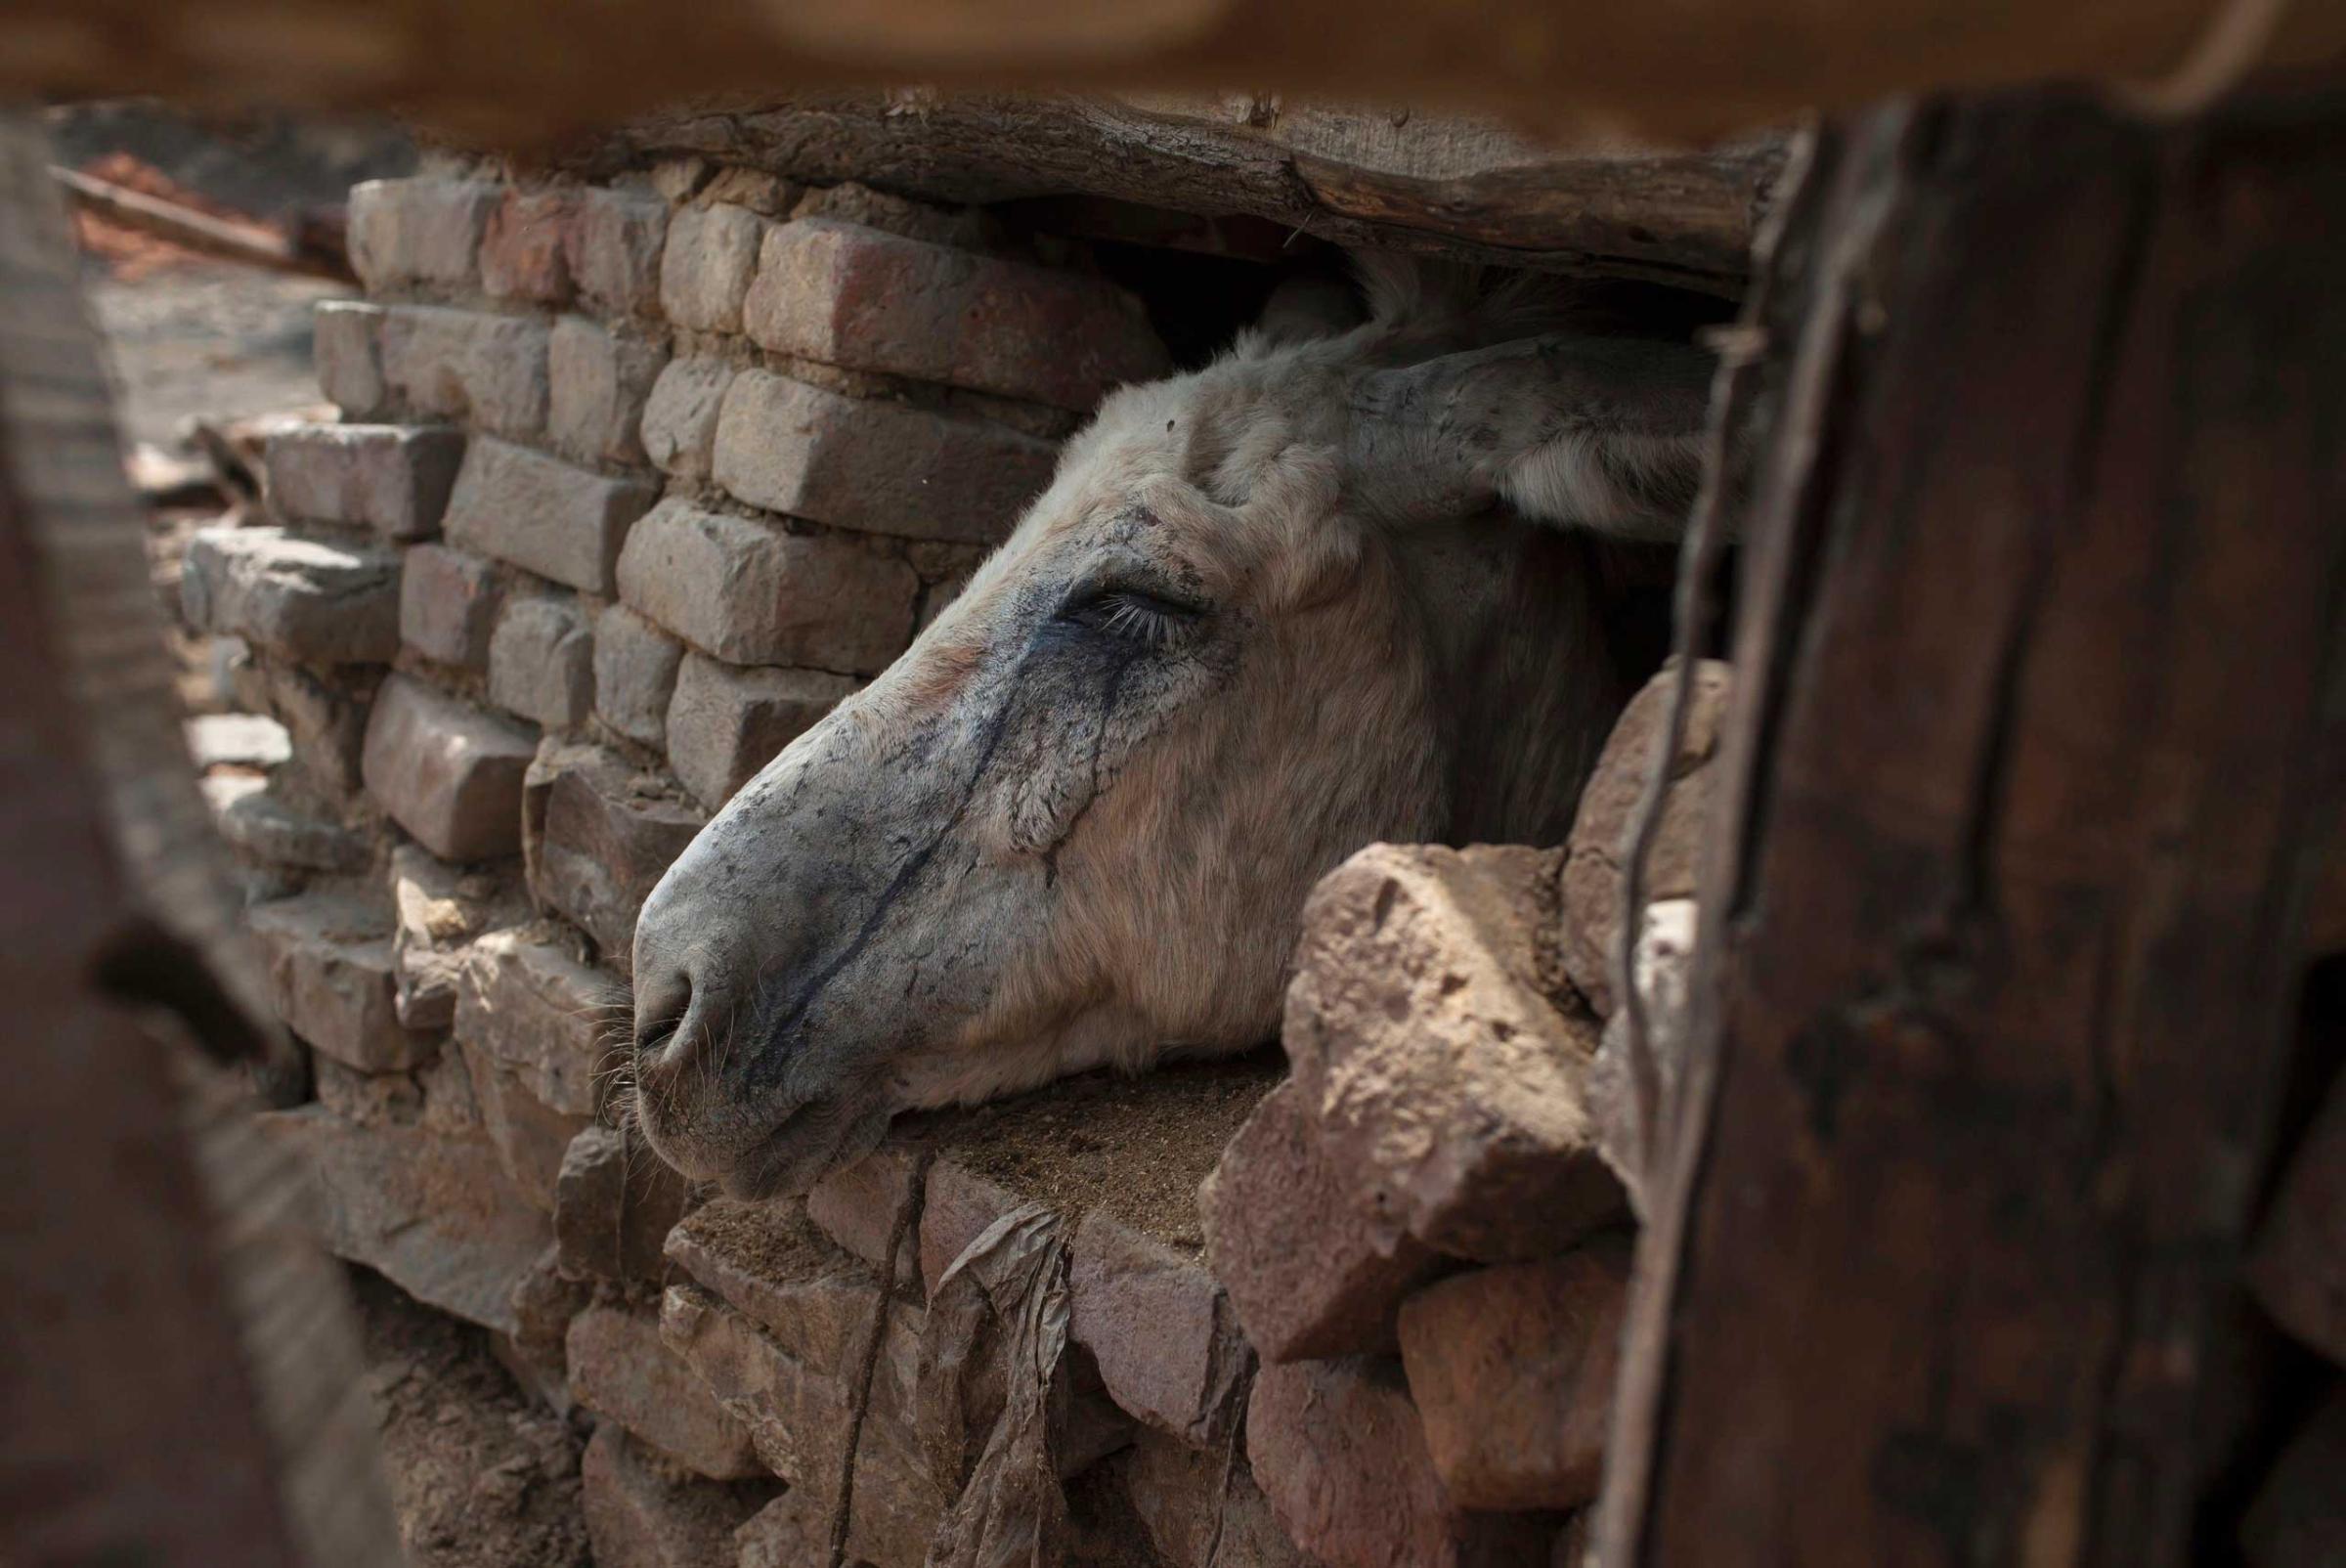 A donkey looks out of its shelter at a coal mine in Choa Saidan Shah in Punjab Province, Pakistan, May 5, 2014.